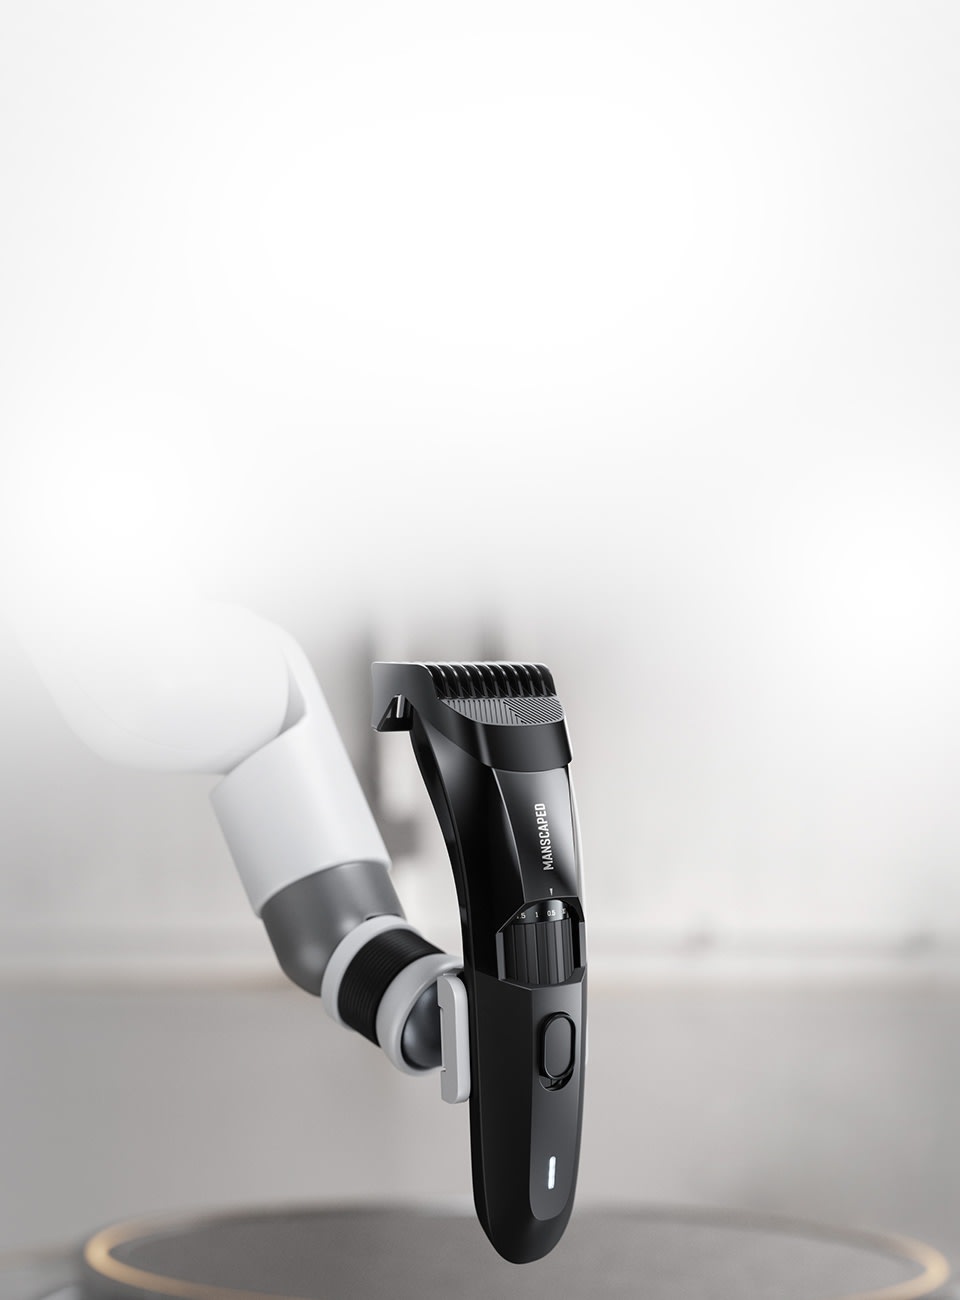 The Beard Hedger™ trimmer on display being held by mechanical arm